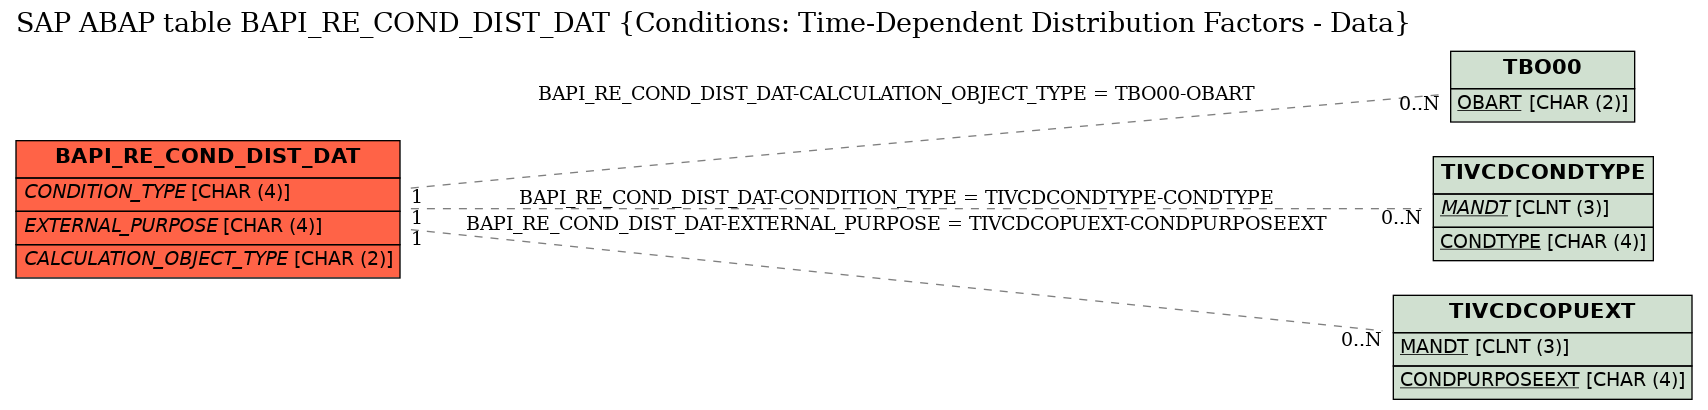 E-R Diagram for table BAPI_RE_COND_DIST_DAT (Conditions: Time-Dependent Distribution Factors - Data)